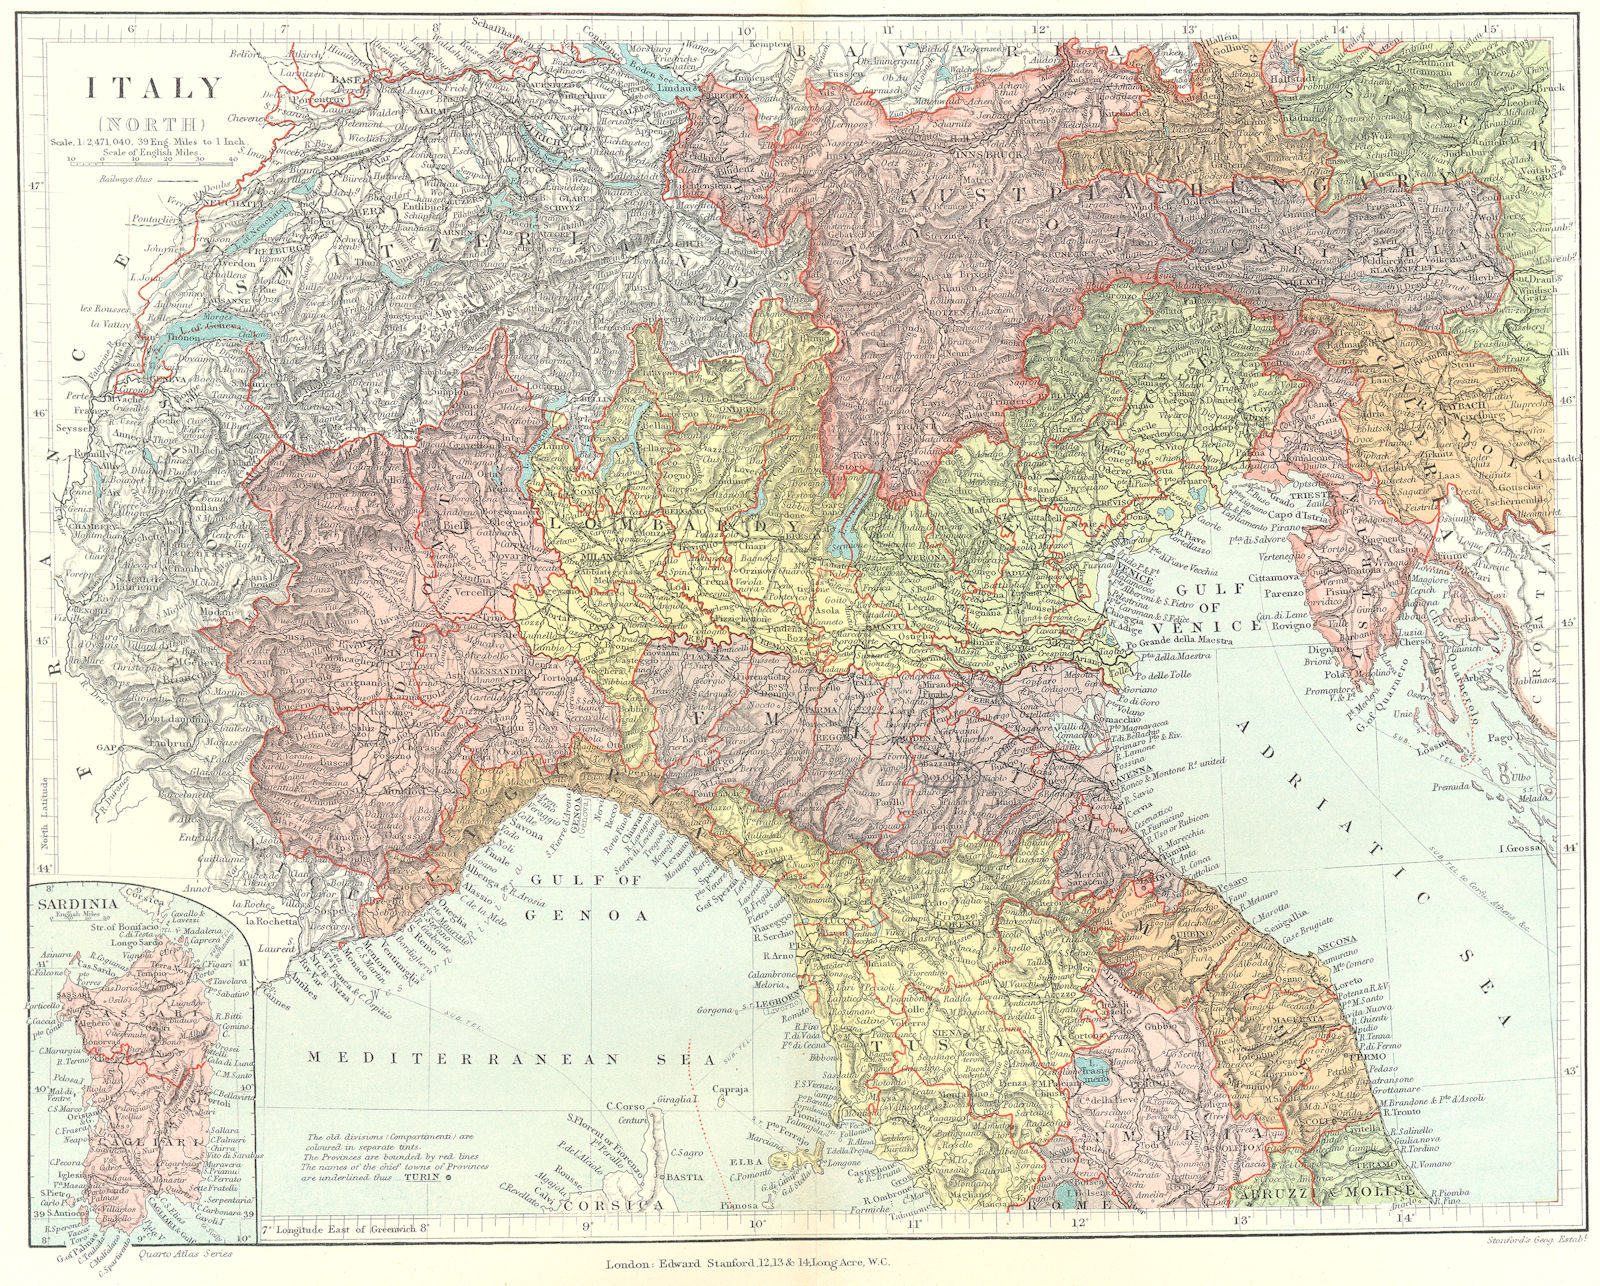 Associate Product NORTHERN ITALY. Showing provinces and compartmenti. STANFORD 1906 old map